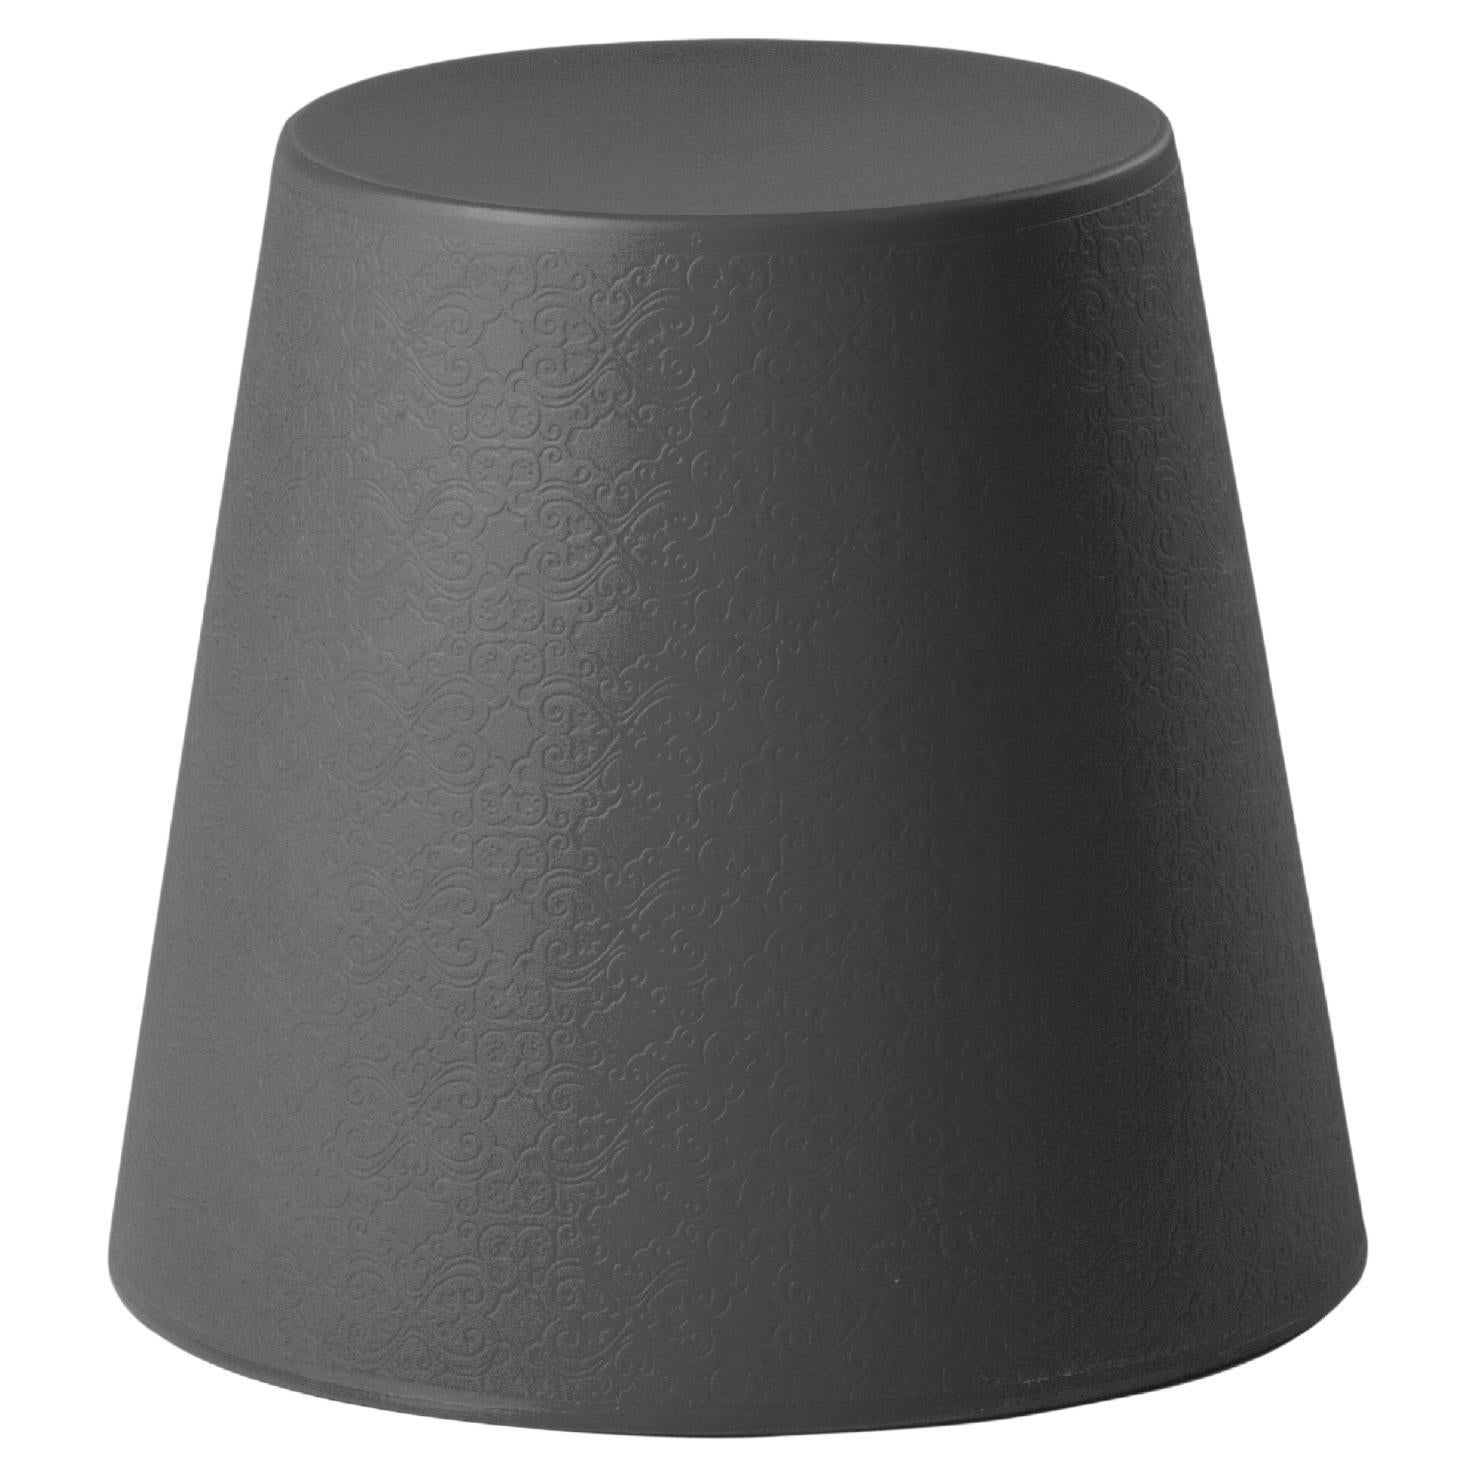 Slide Design Ali Baba Stool in Elephant Gray by Giò Colonna Romano For Sale